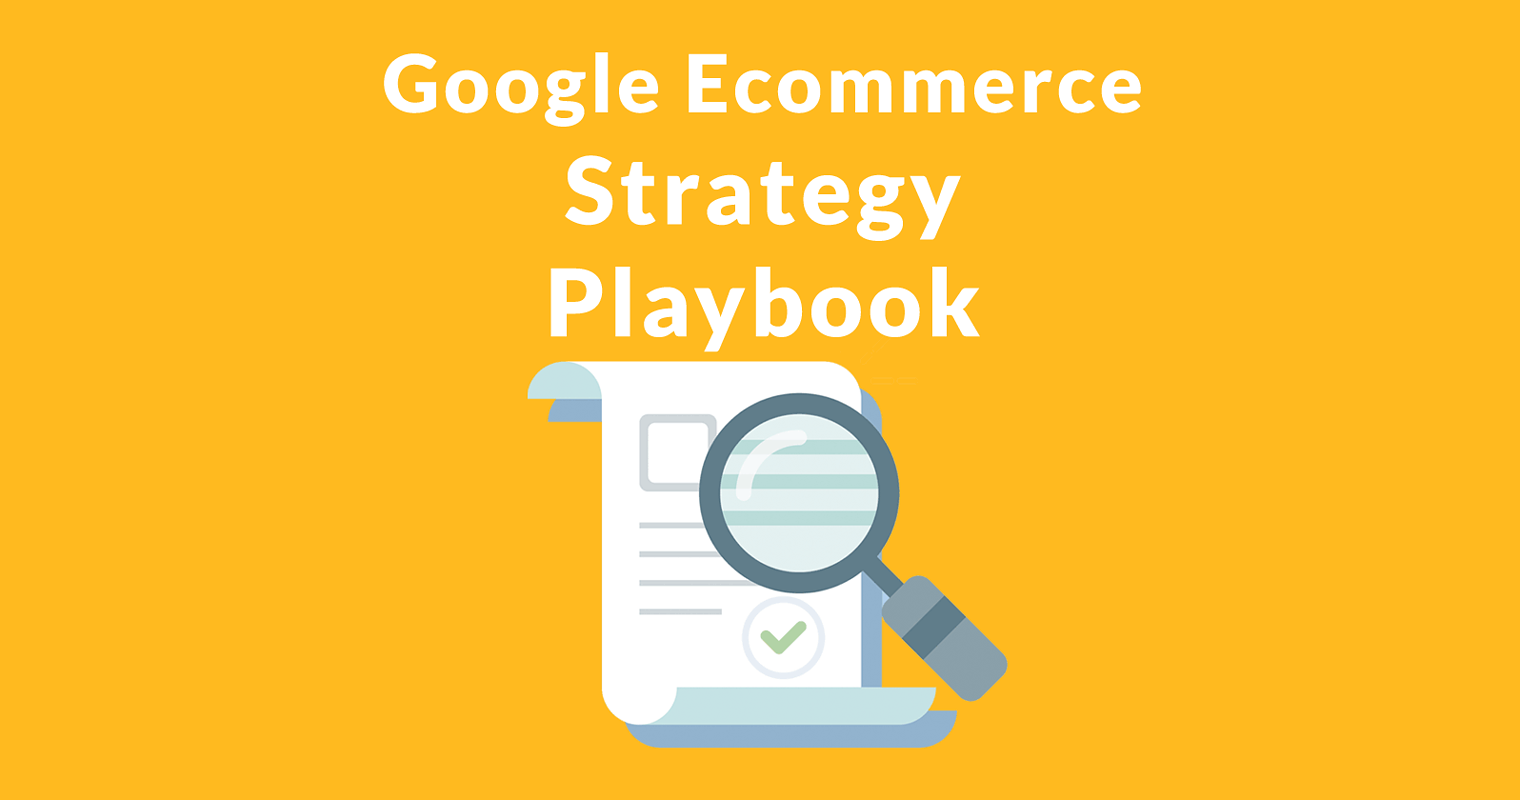 “Secret” Google Playbook Shows How to Improve Ecommerce Sales